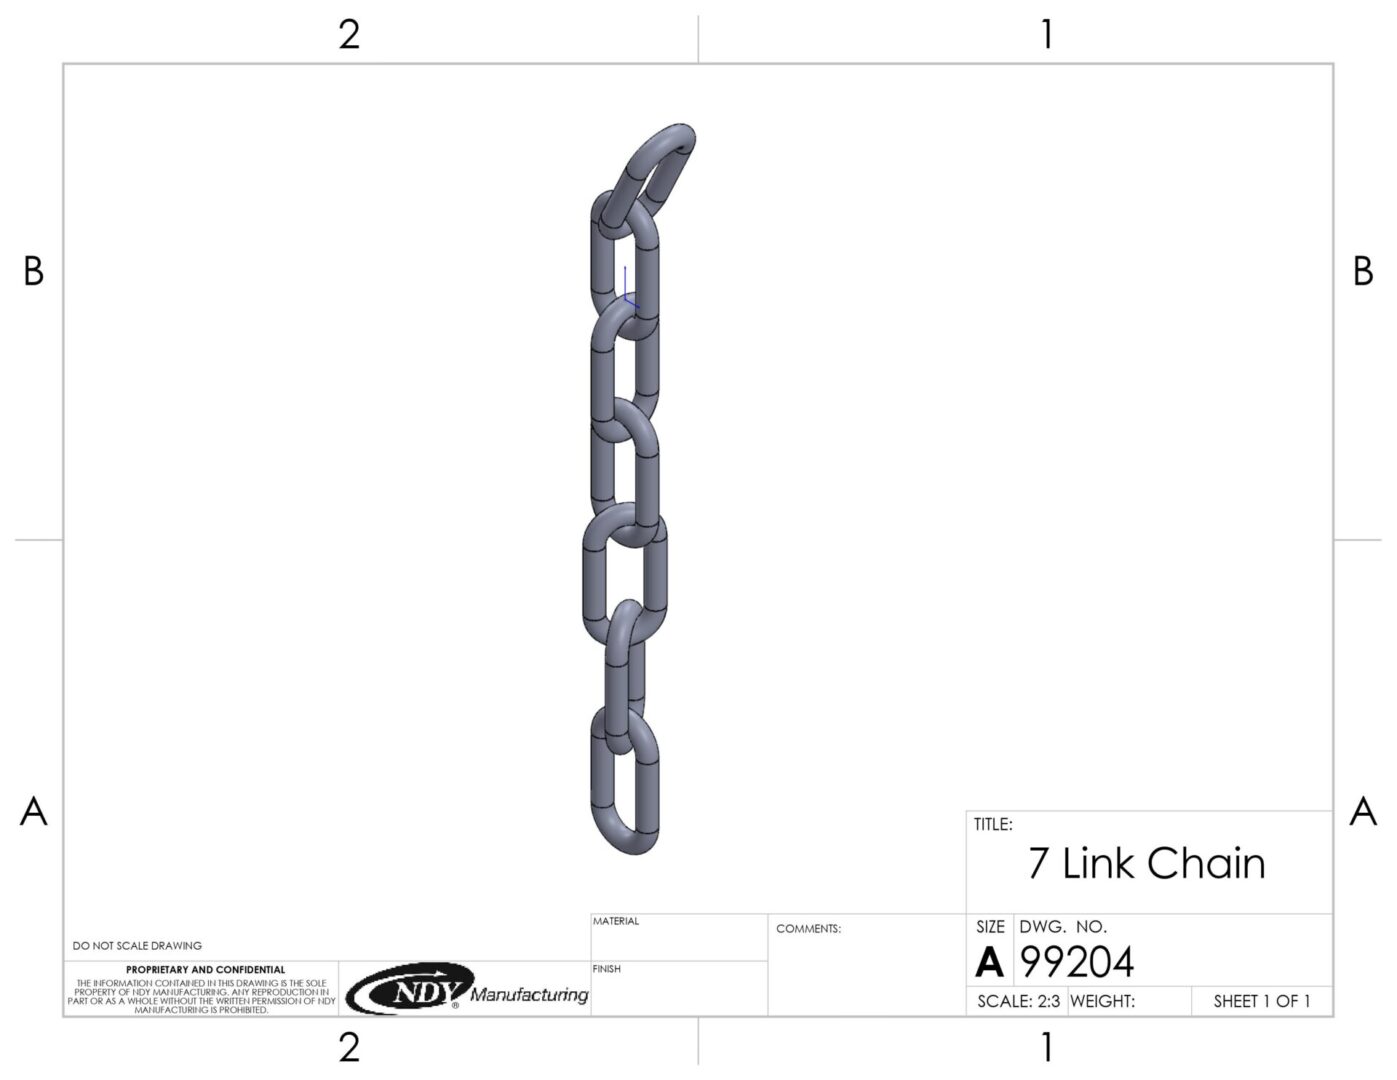 A drawing of a 7 Link Replacement Chain for Stalk Stomper.